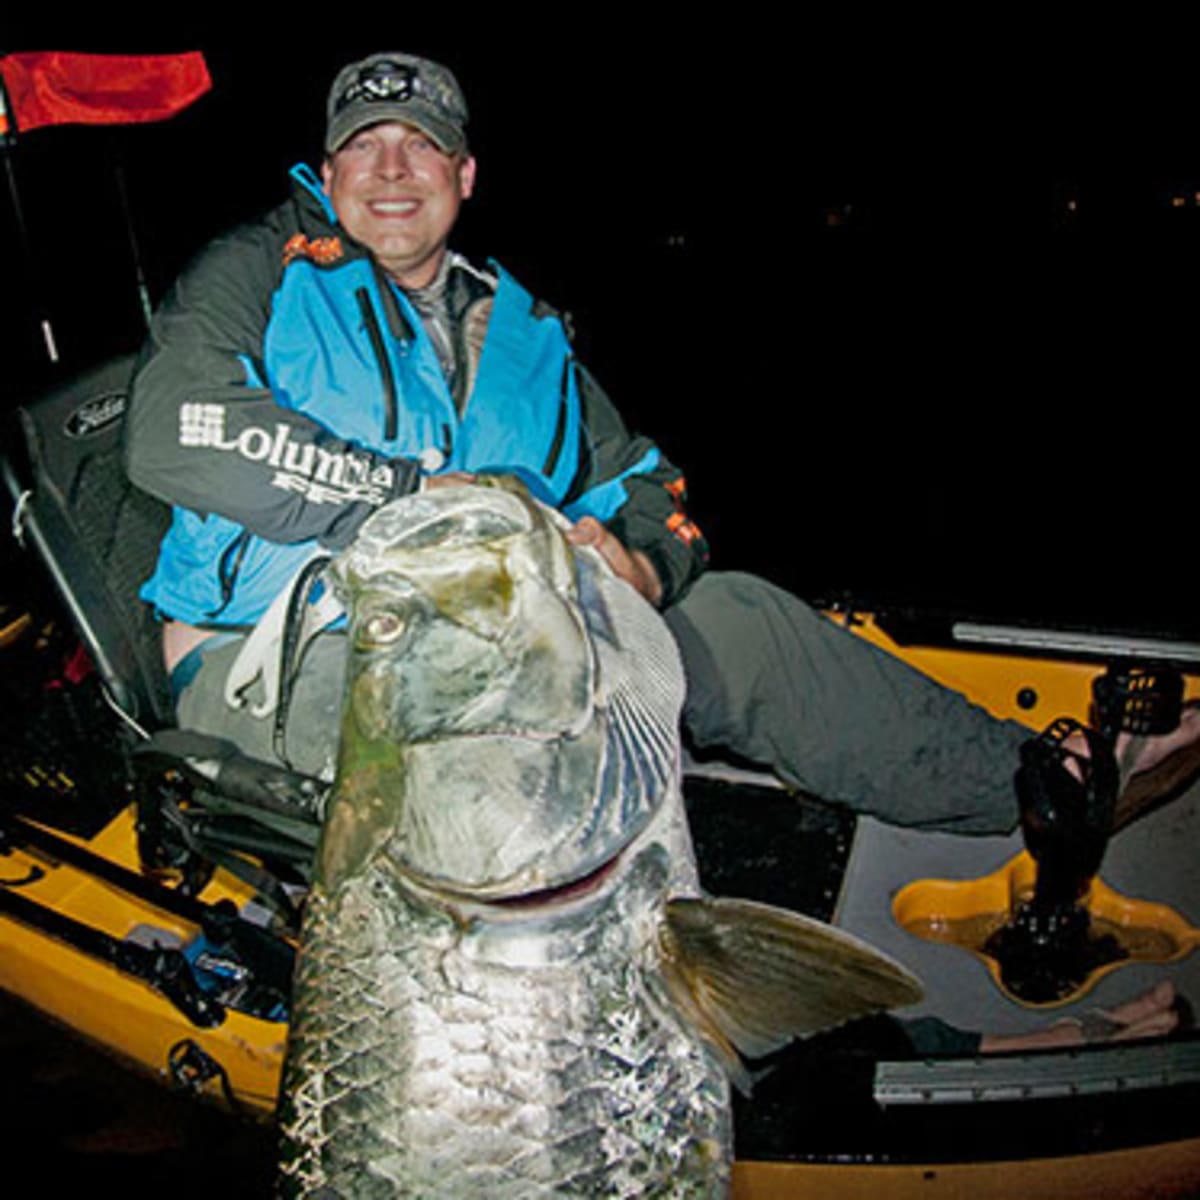 Gear up for Kayak Fishing Tarpon - Tools for Taming the Silver